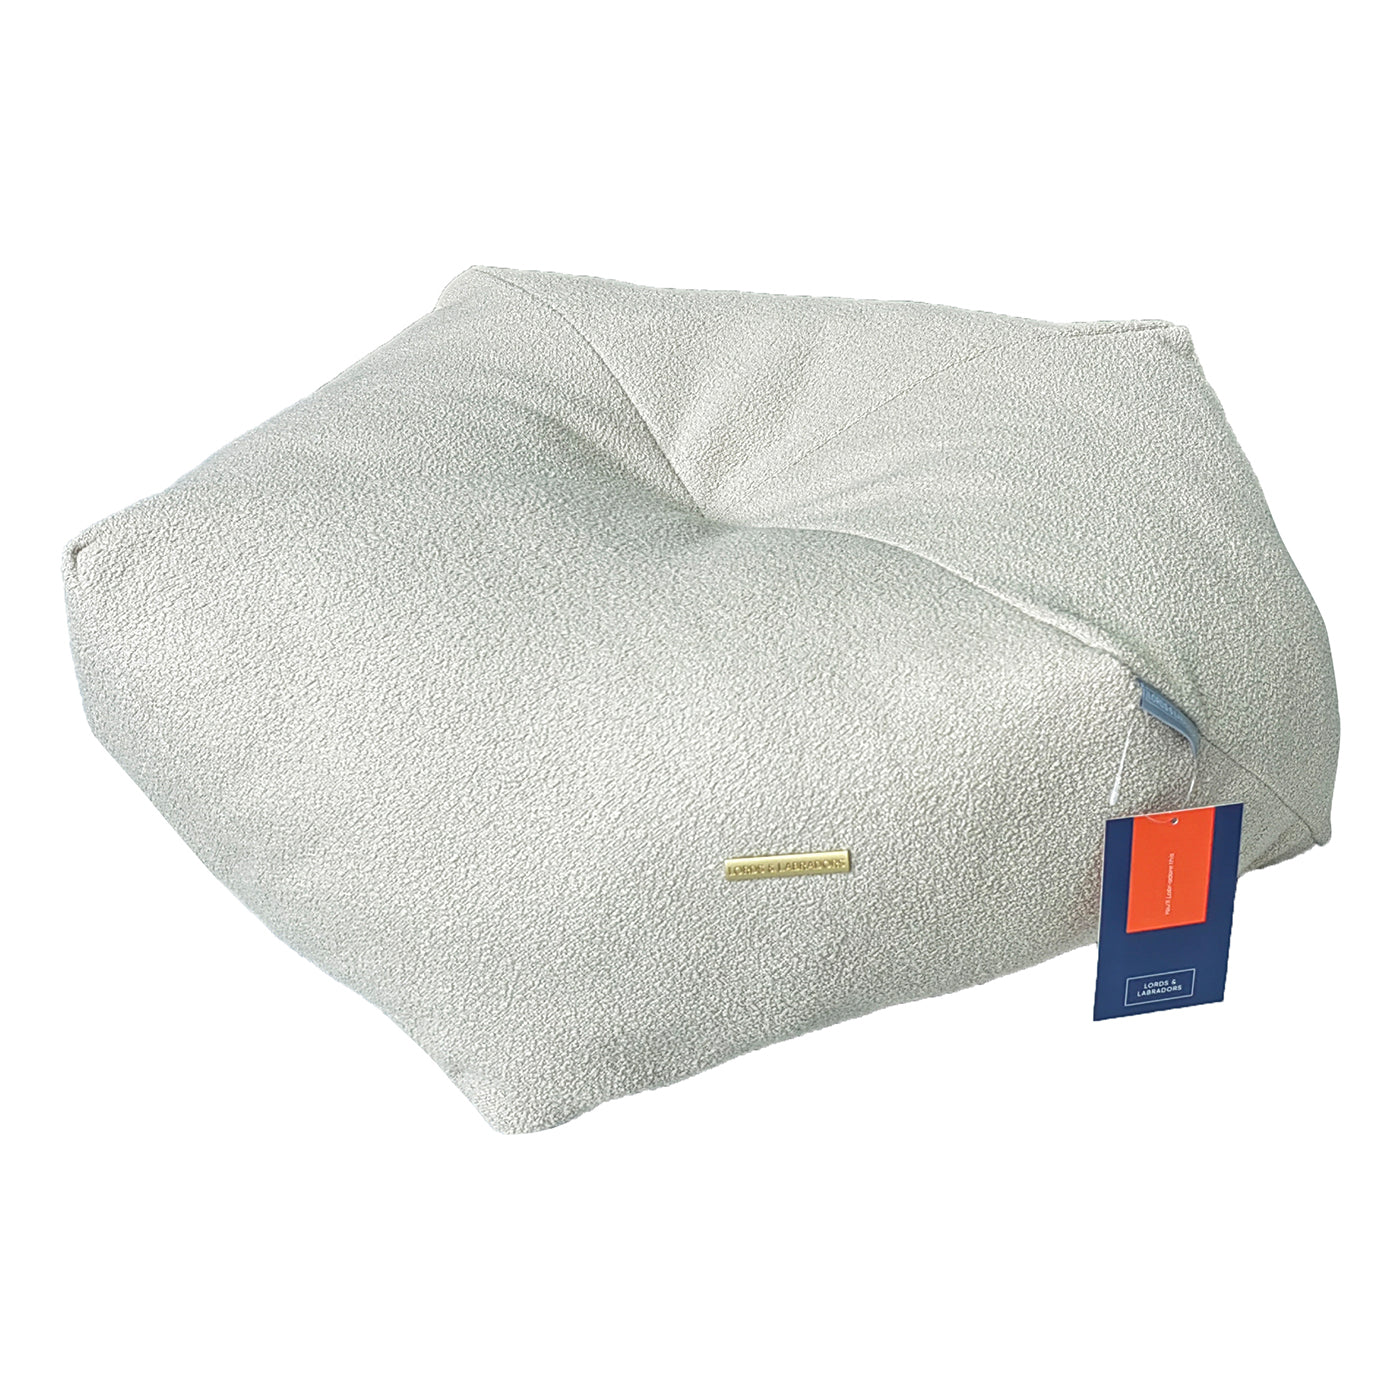 Lords & Labradors Snooze Pouff Alabaster Pet Bed, Luxury Beds For Dogs, Available Now at Lords & Labradors US